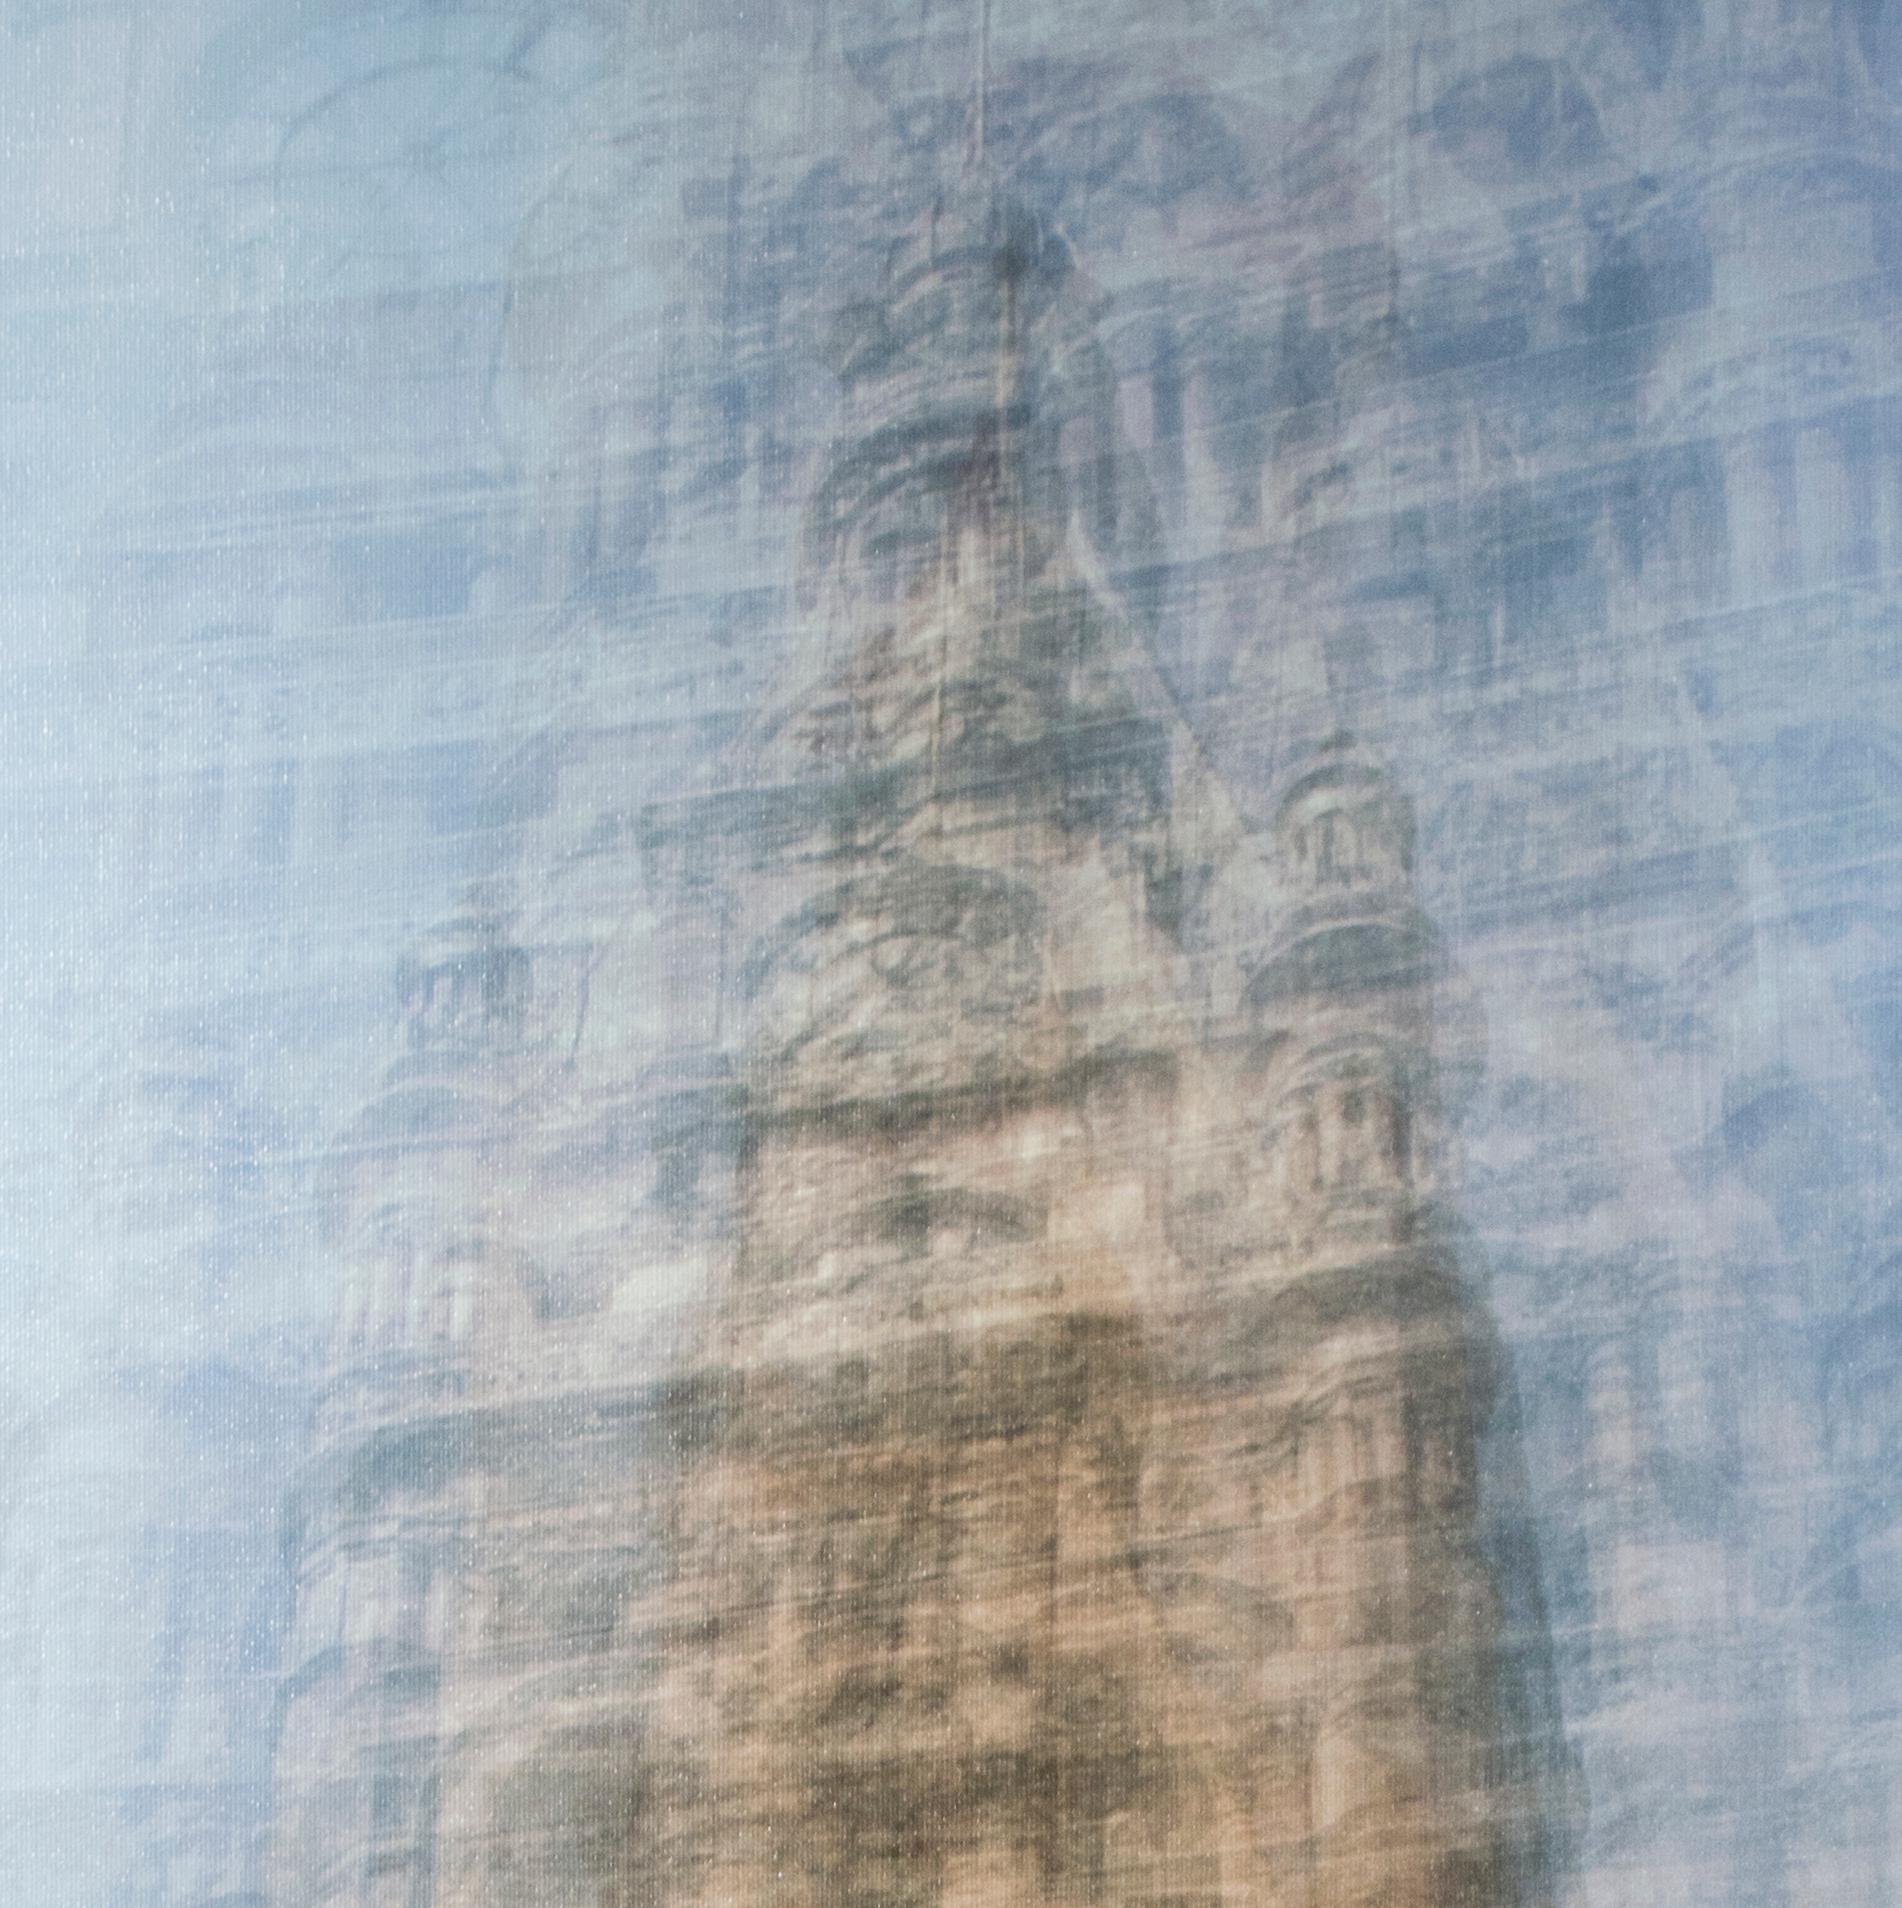 In this image, Jessie Spiess applies her signature multiple-exposure technique to the towering historic structure of the Milwaukee City Hall. She often turns her camera to views of such iconic buildings, her technique emphasizing the limitations of